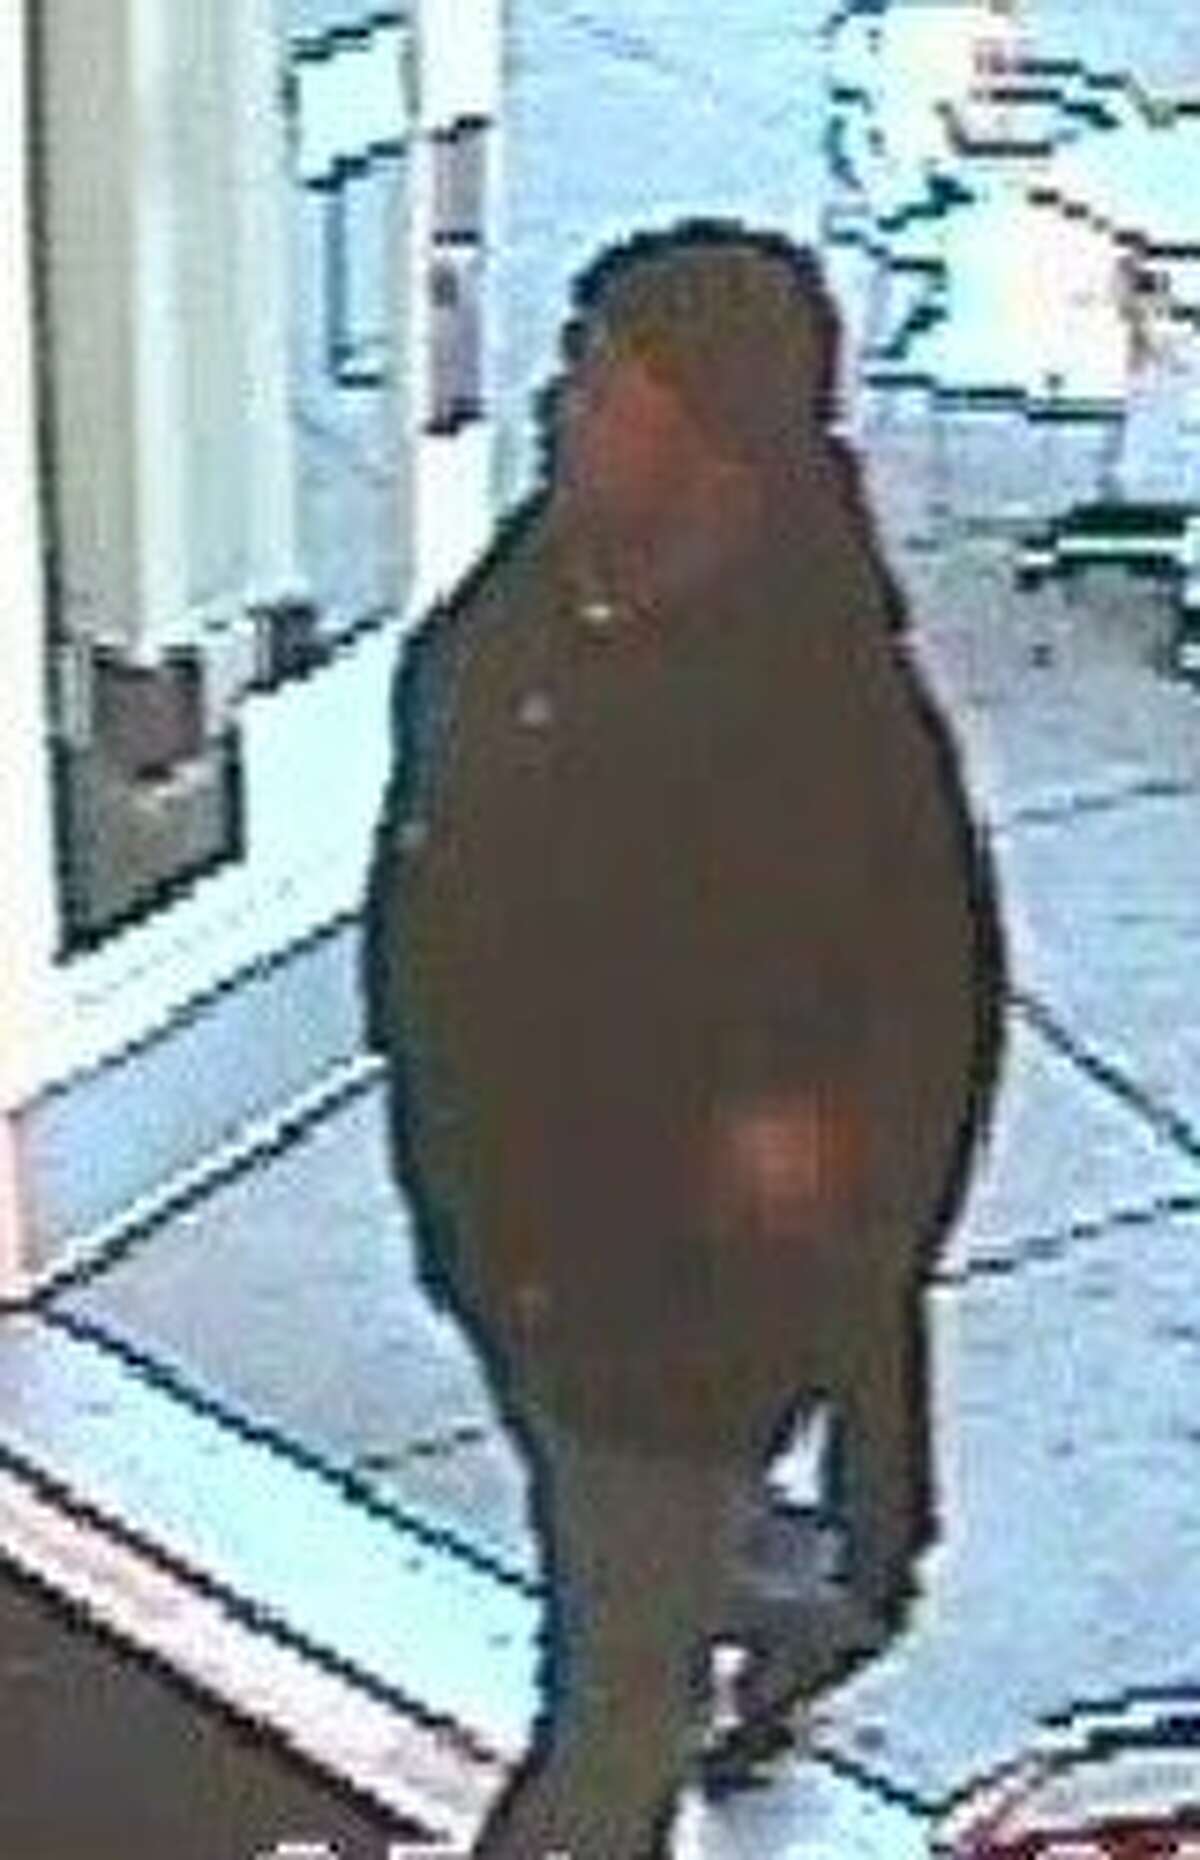 Oakland police released this photo of a potential suspect in a series of North Oakland armed robberies.